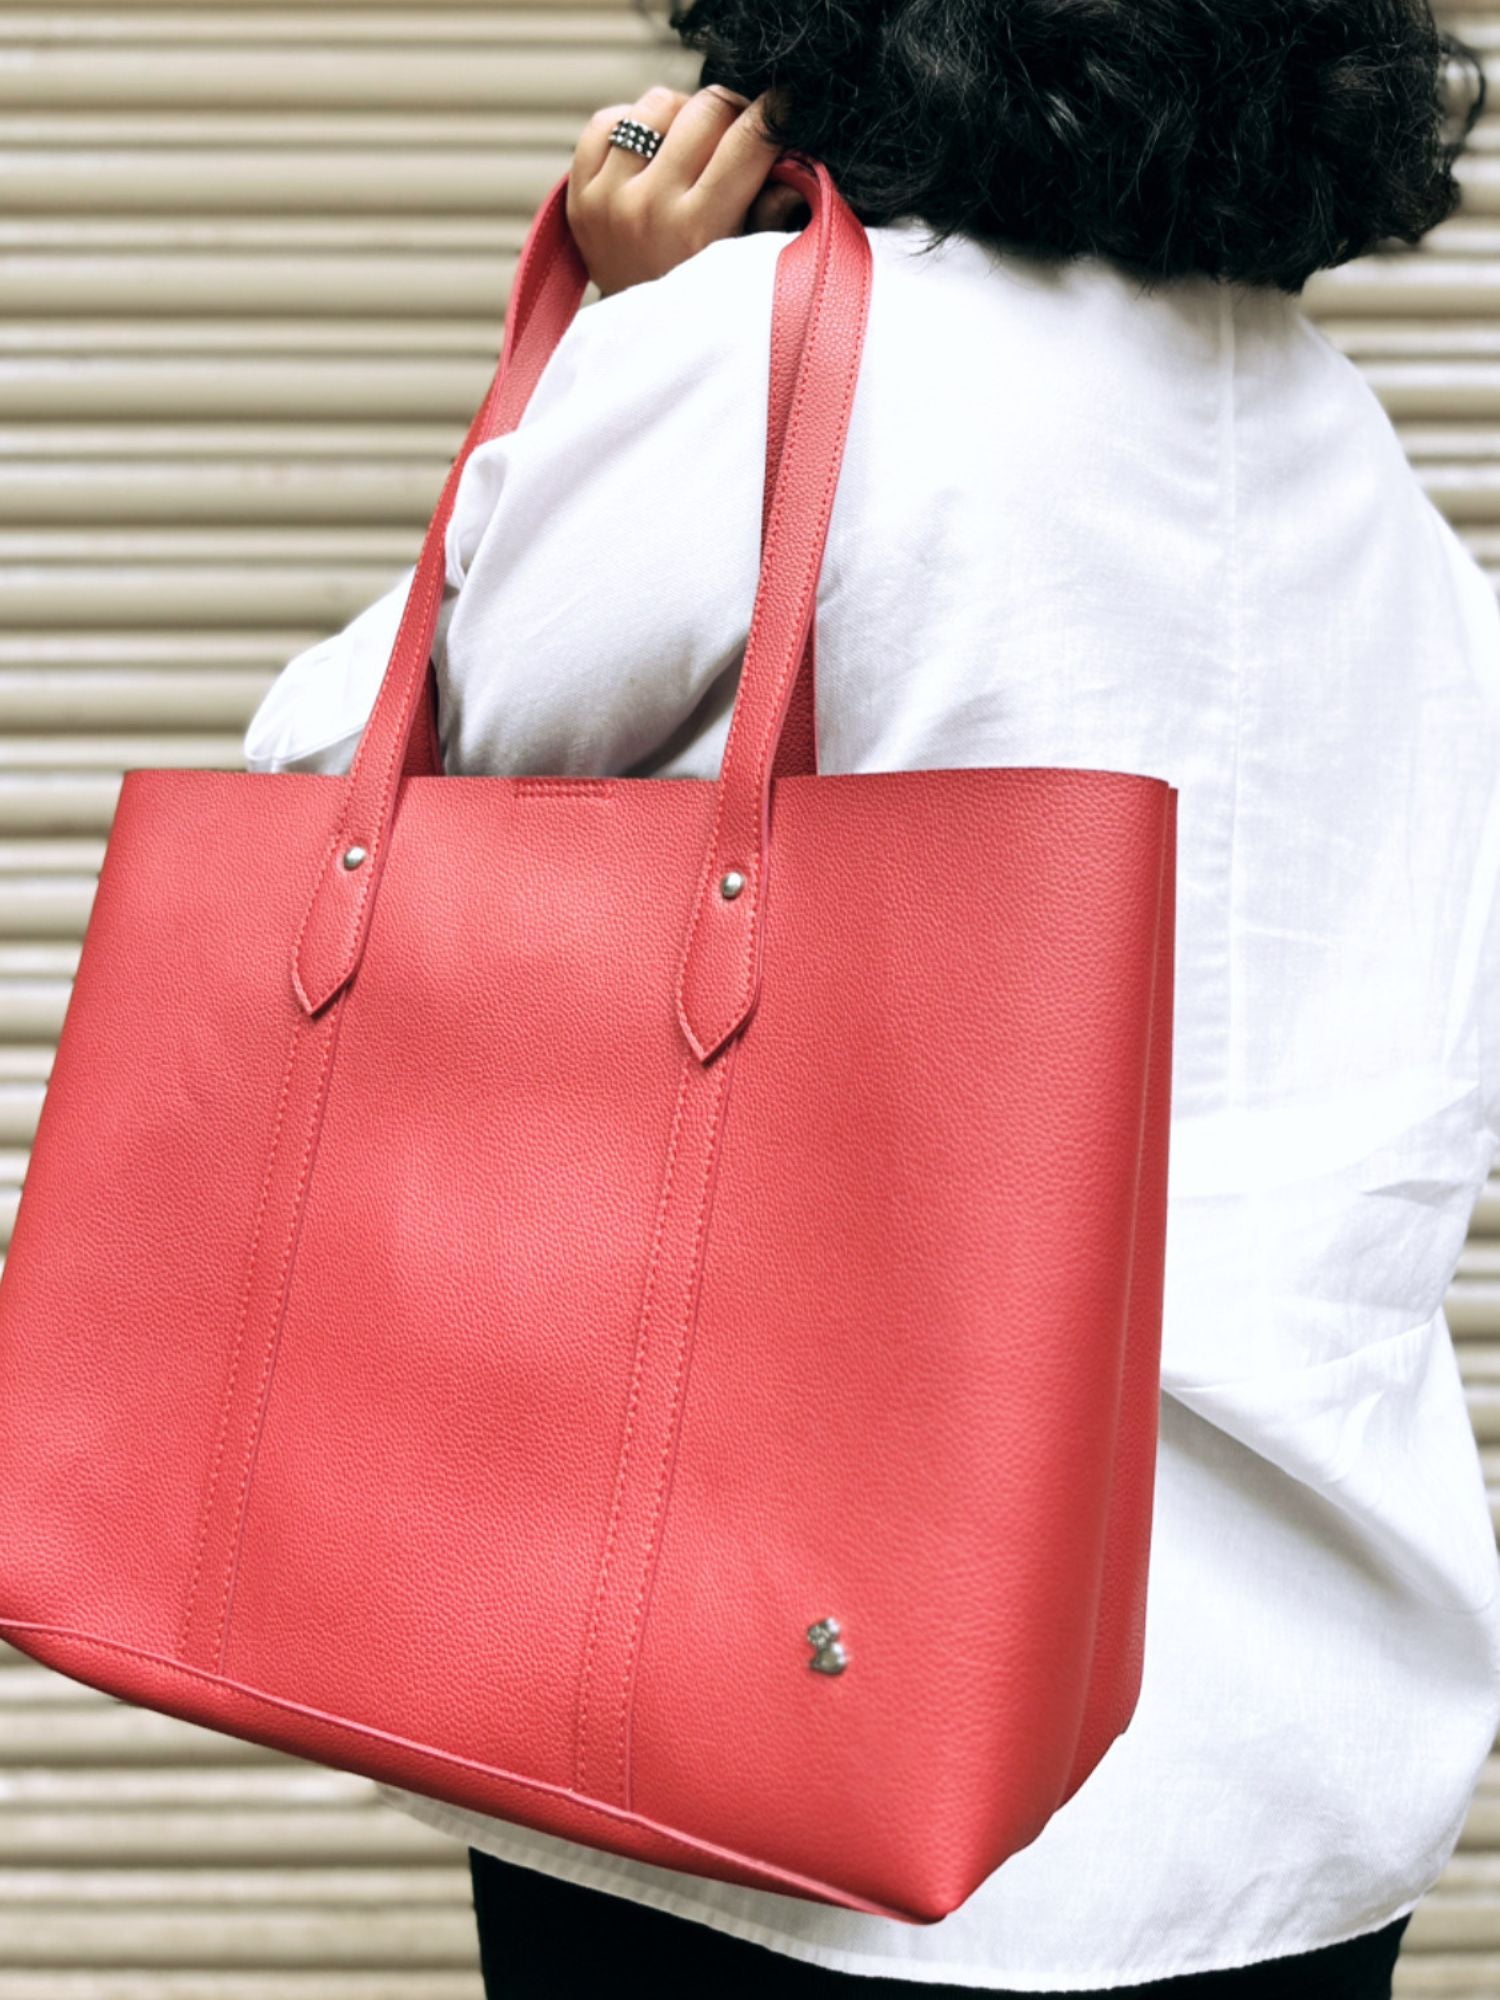 tote bag with laptop compartment